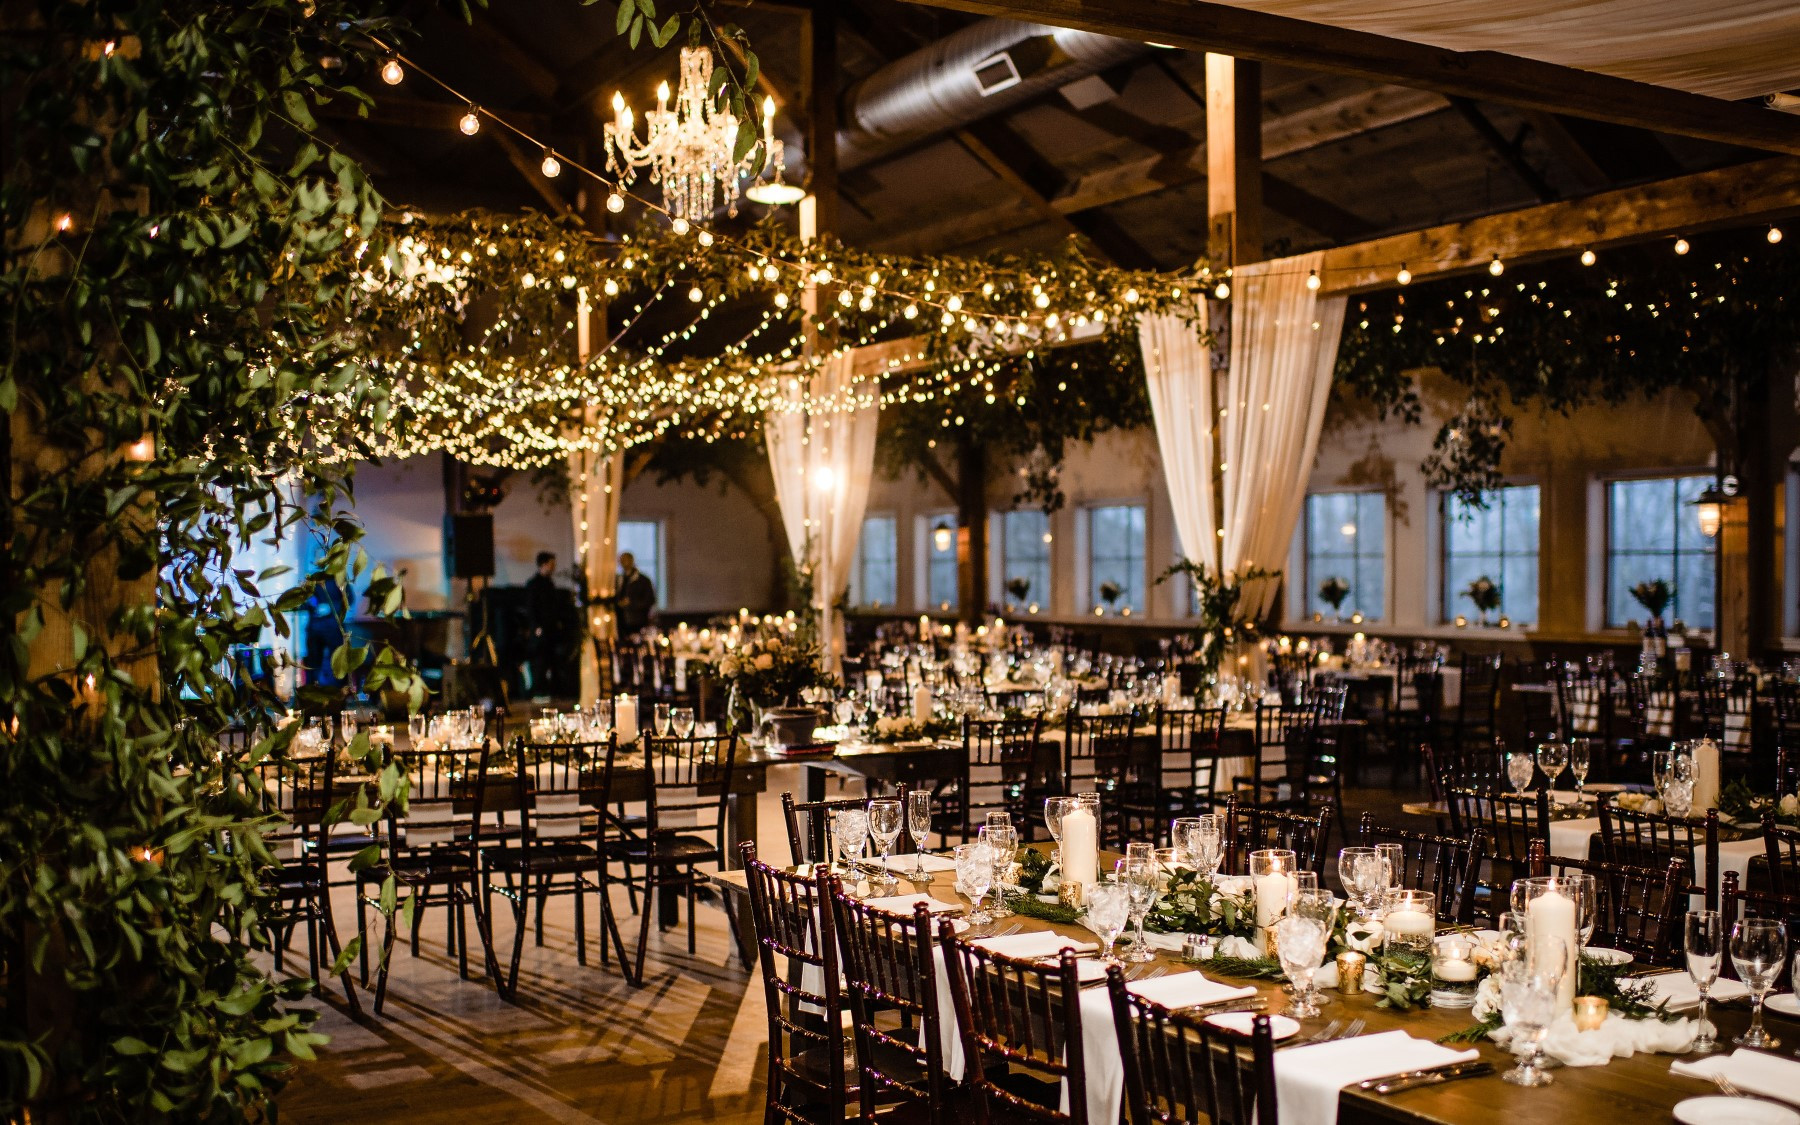 event barn featuring greenery and lights with farmhouse tables.